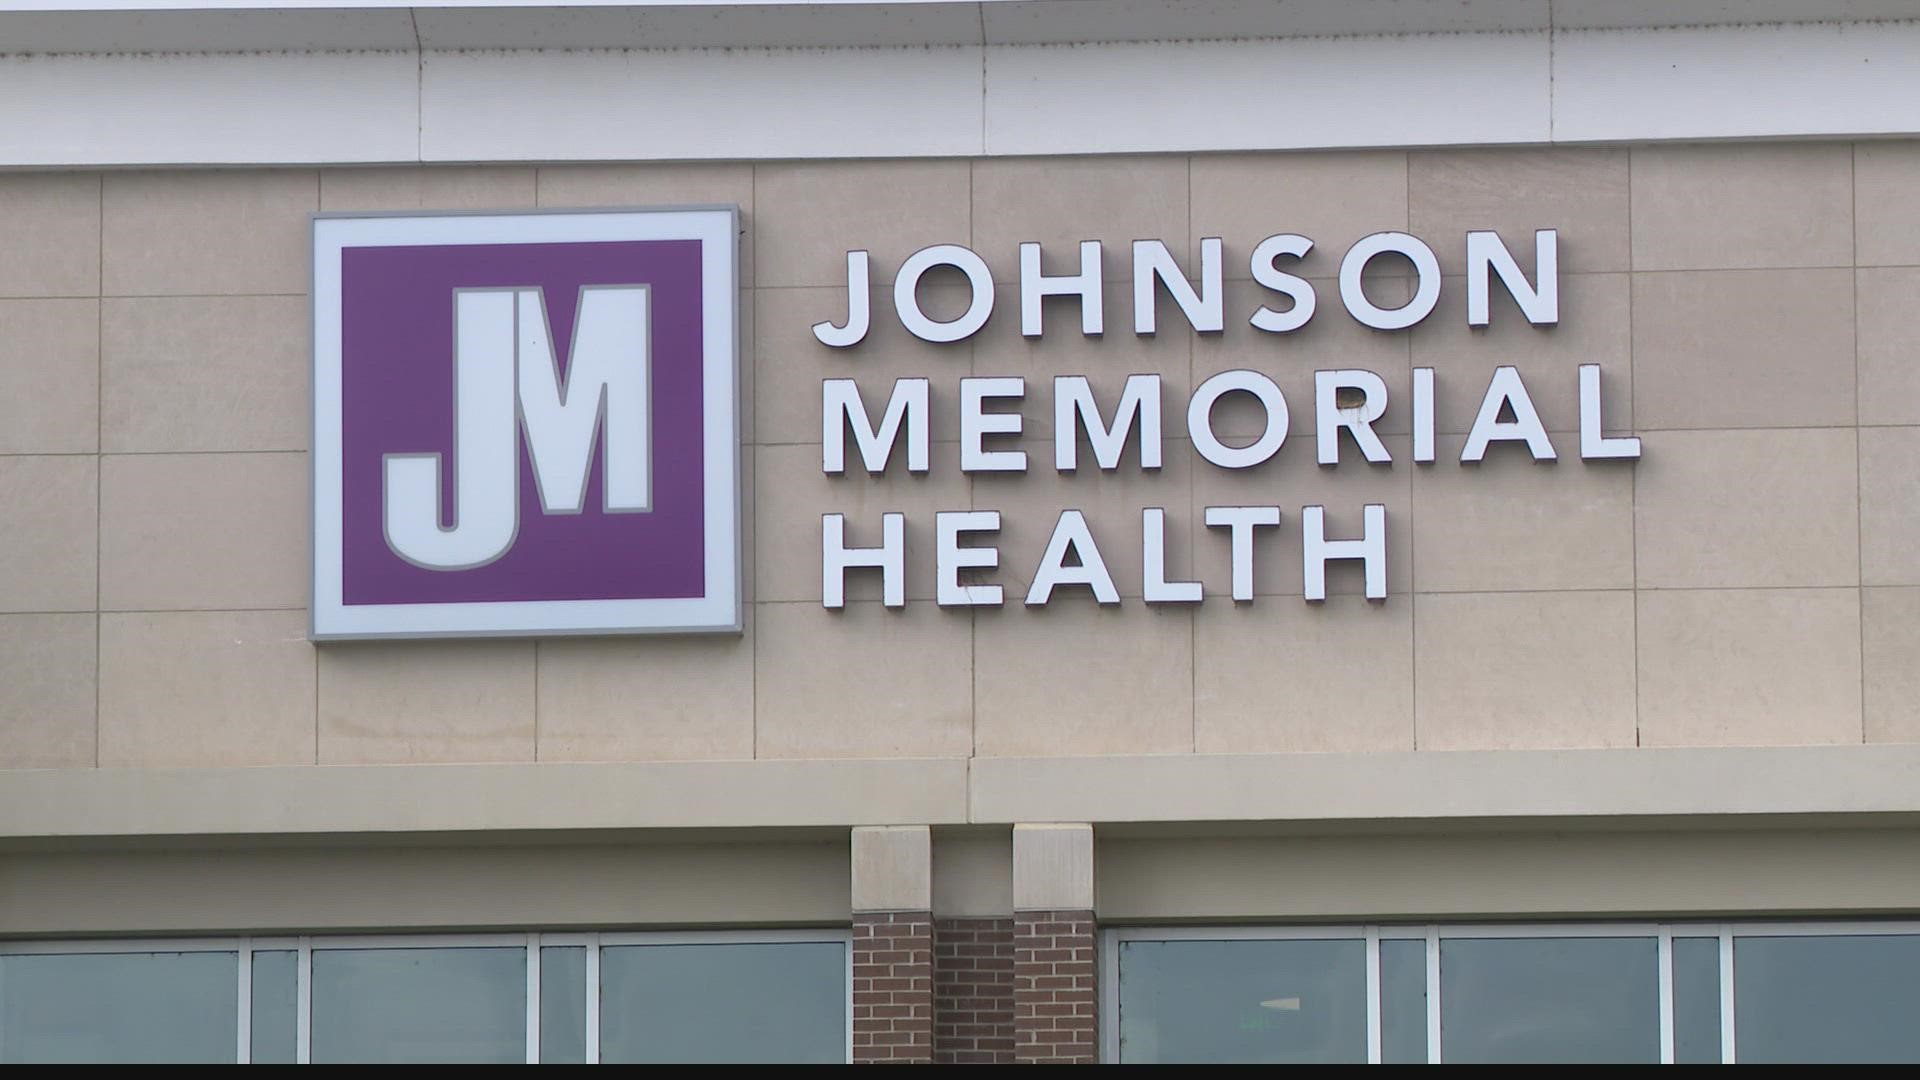 Hackers who compromised the Johnson Memorial Health computer network are demanding money from the healthcare system.